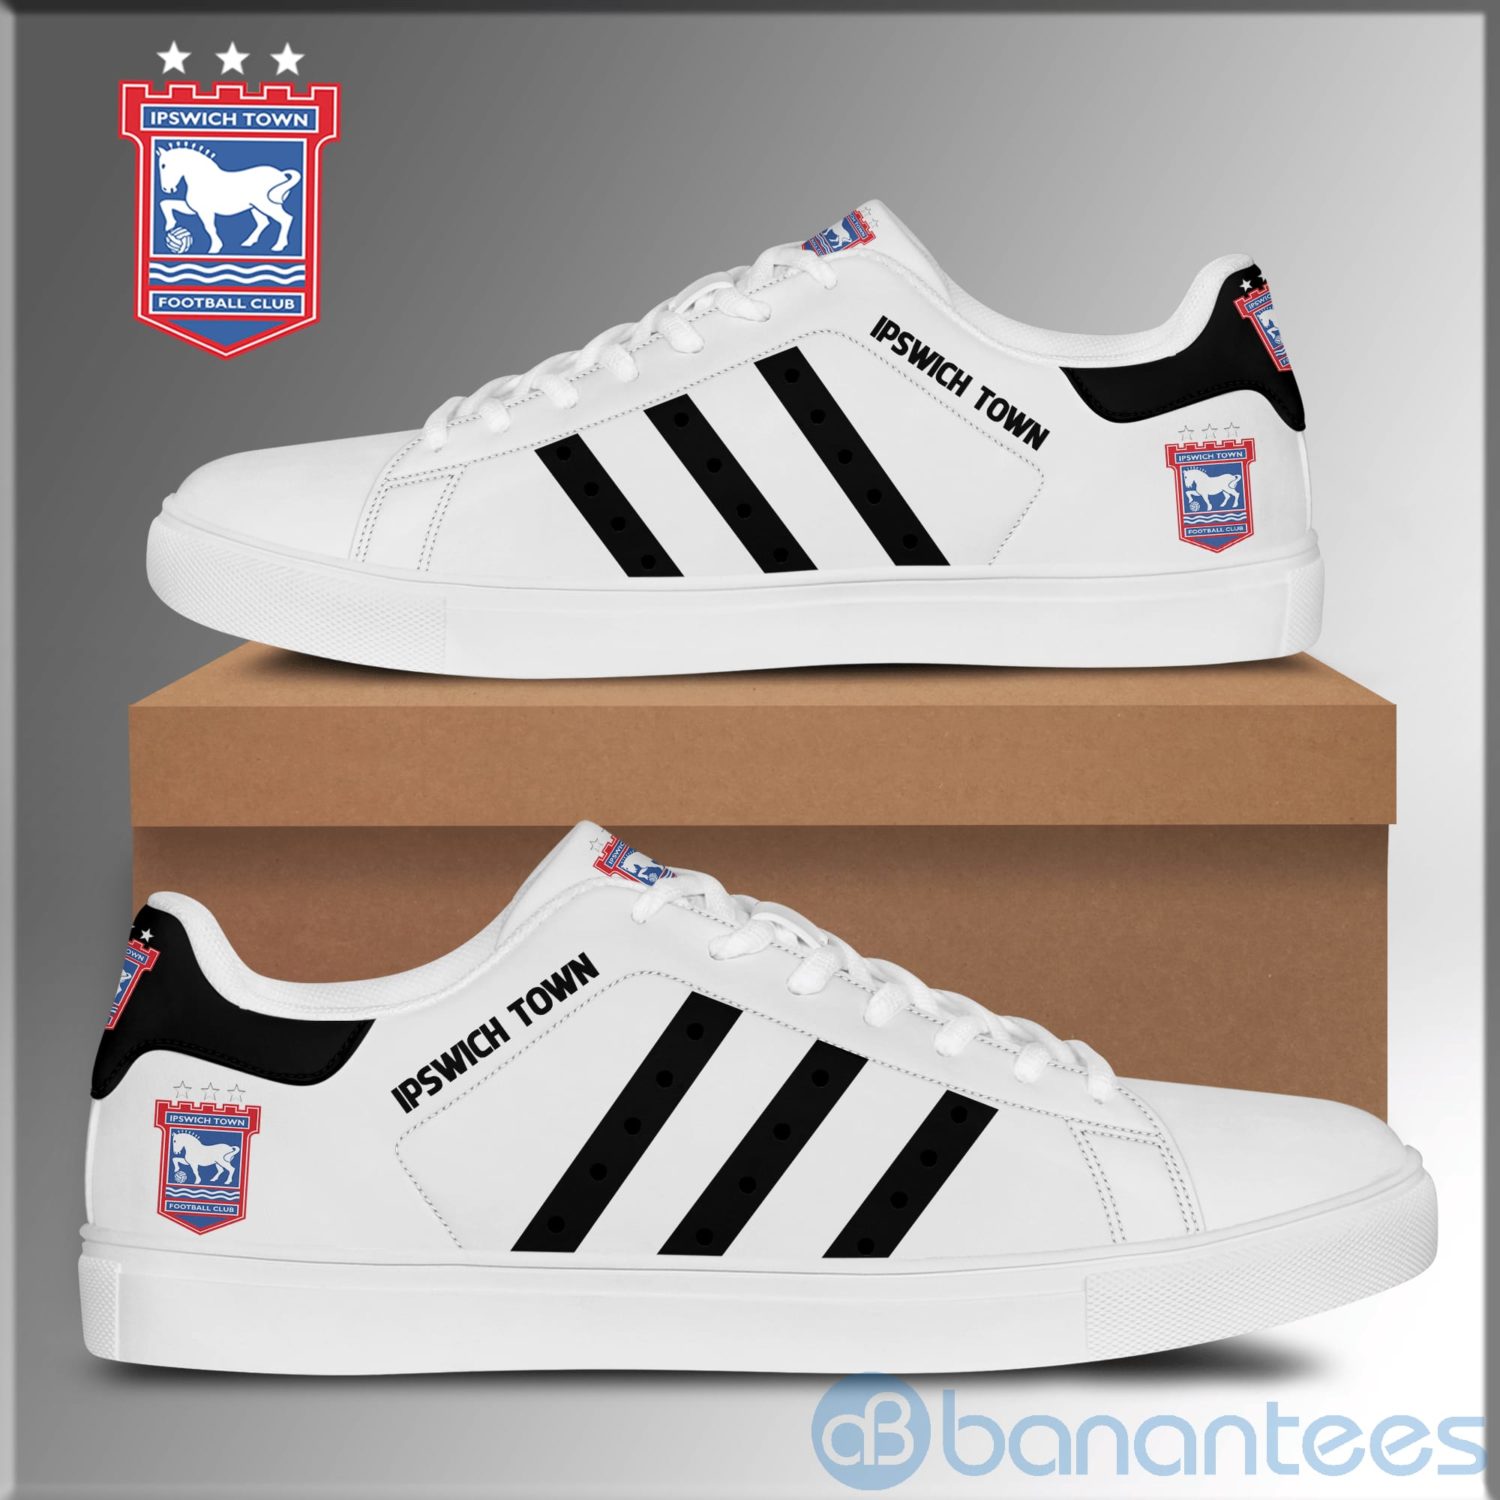 Ipstown Football Black Striped White Low Top Skate Shoes